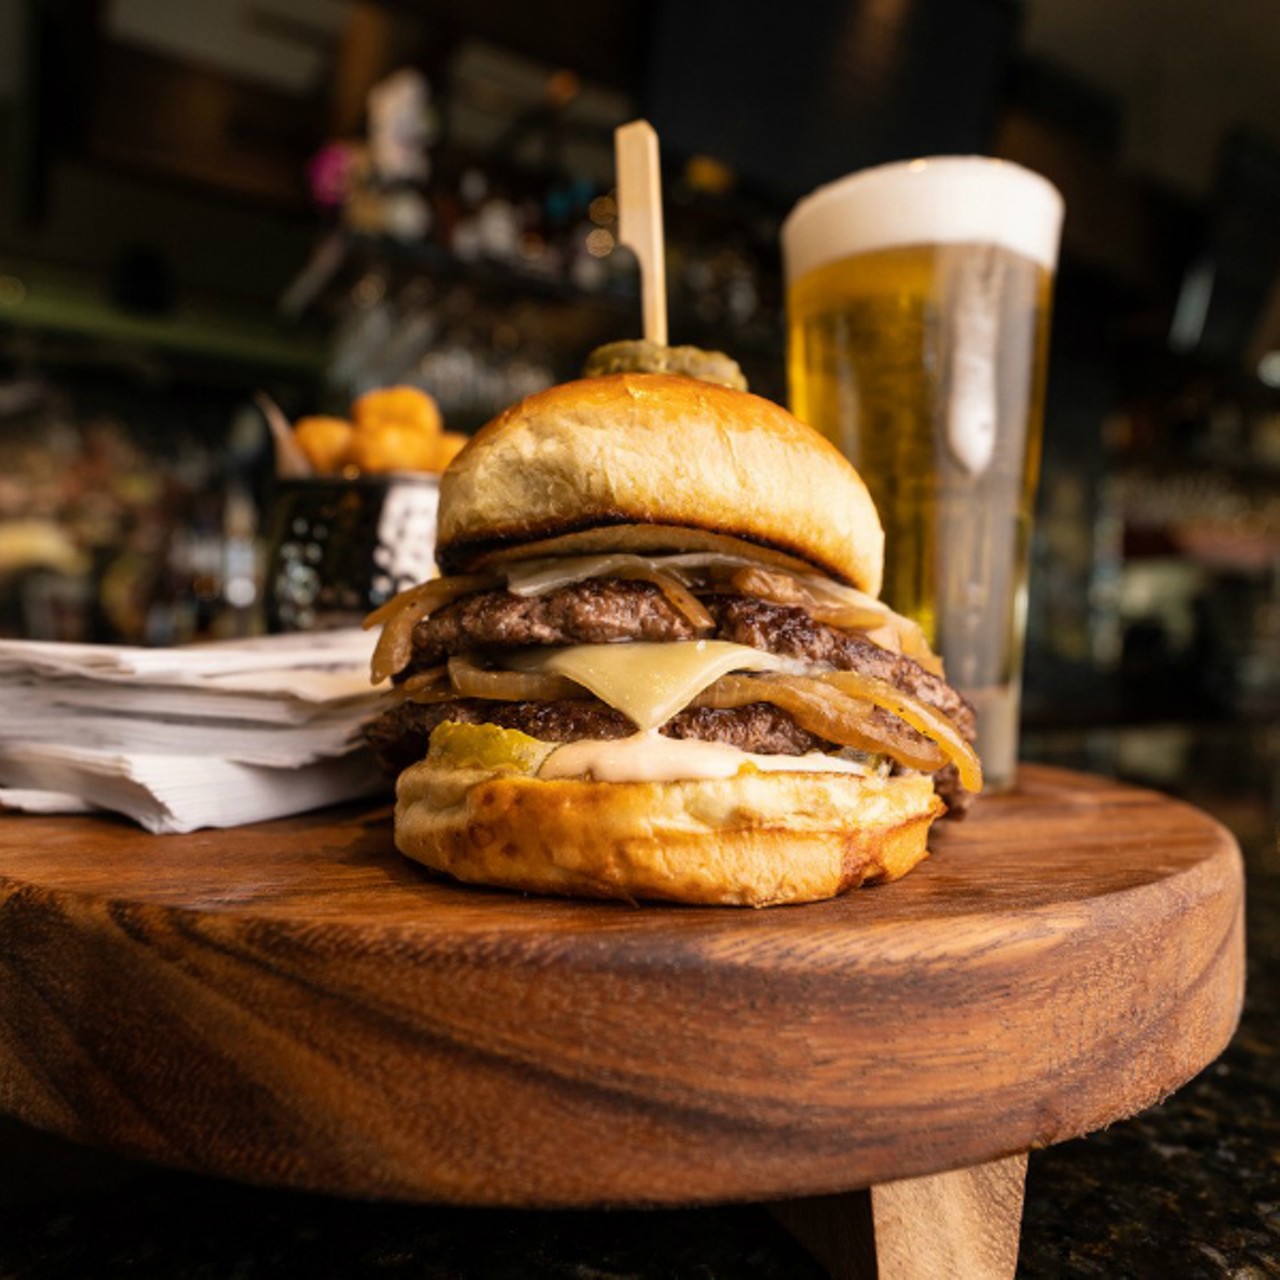 Bar Louie
(14 Maryland Plaza; 314-678-3385)
6 Napkins Burger:  Two smashed slider patties, grilled with yellow mustard, topped with caramelized onions, double white cheddar, pickles and Louie sauce.